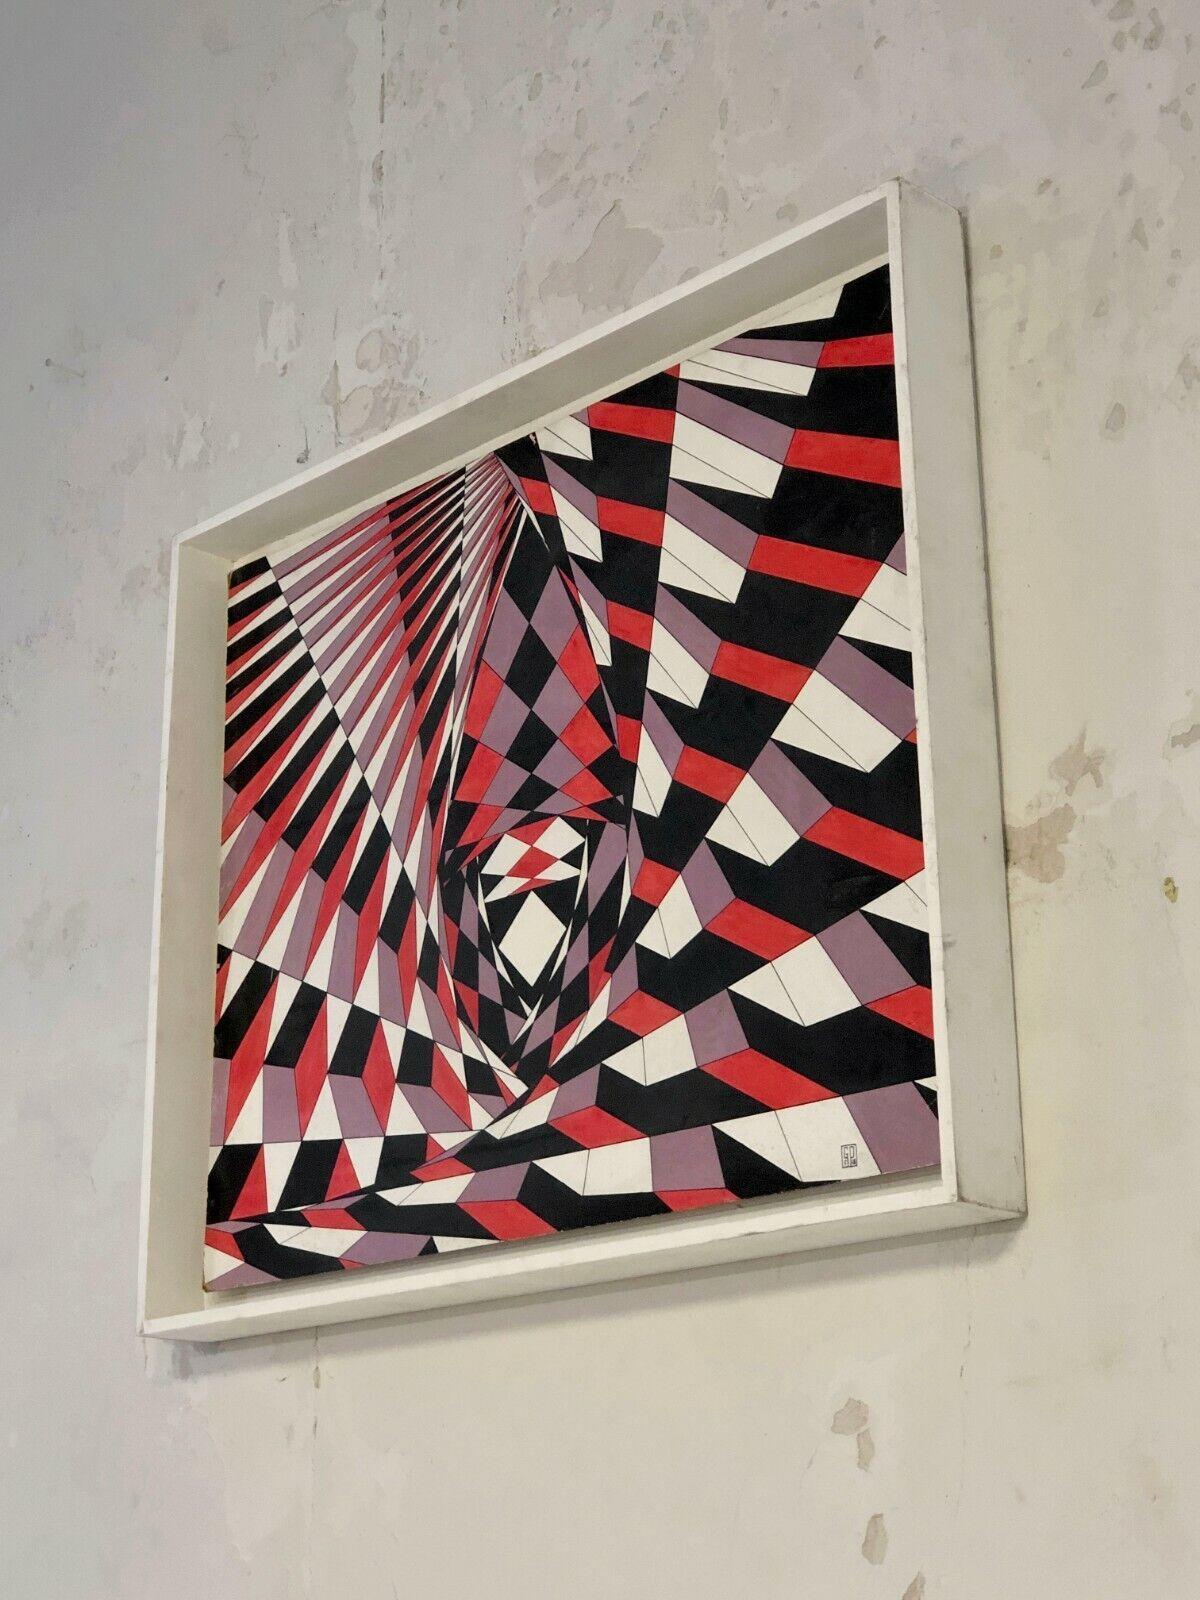 Mid-20th Century An OPTICAL POP OP-ART KINETIC PAINTING on Panel by GUY POUPPEZ, France 1968 For Sale